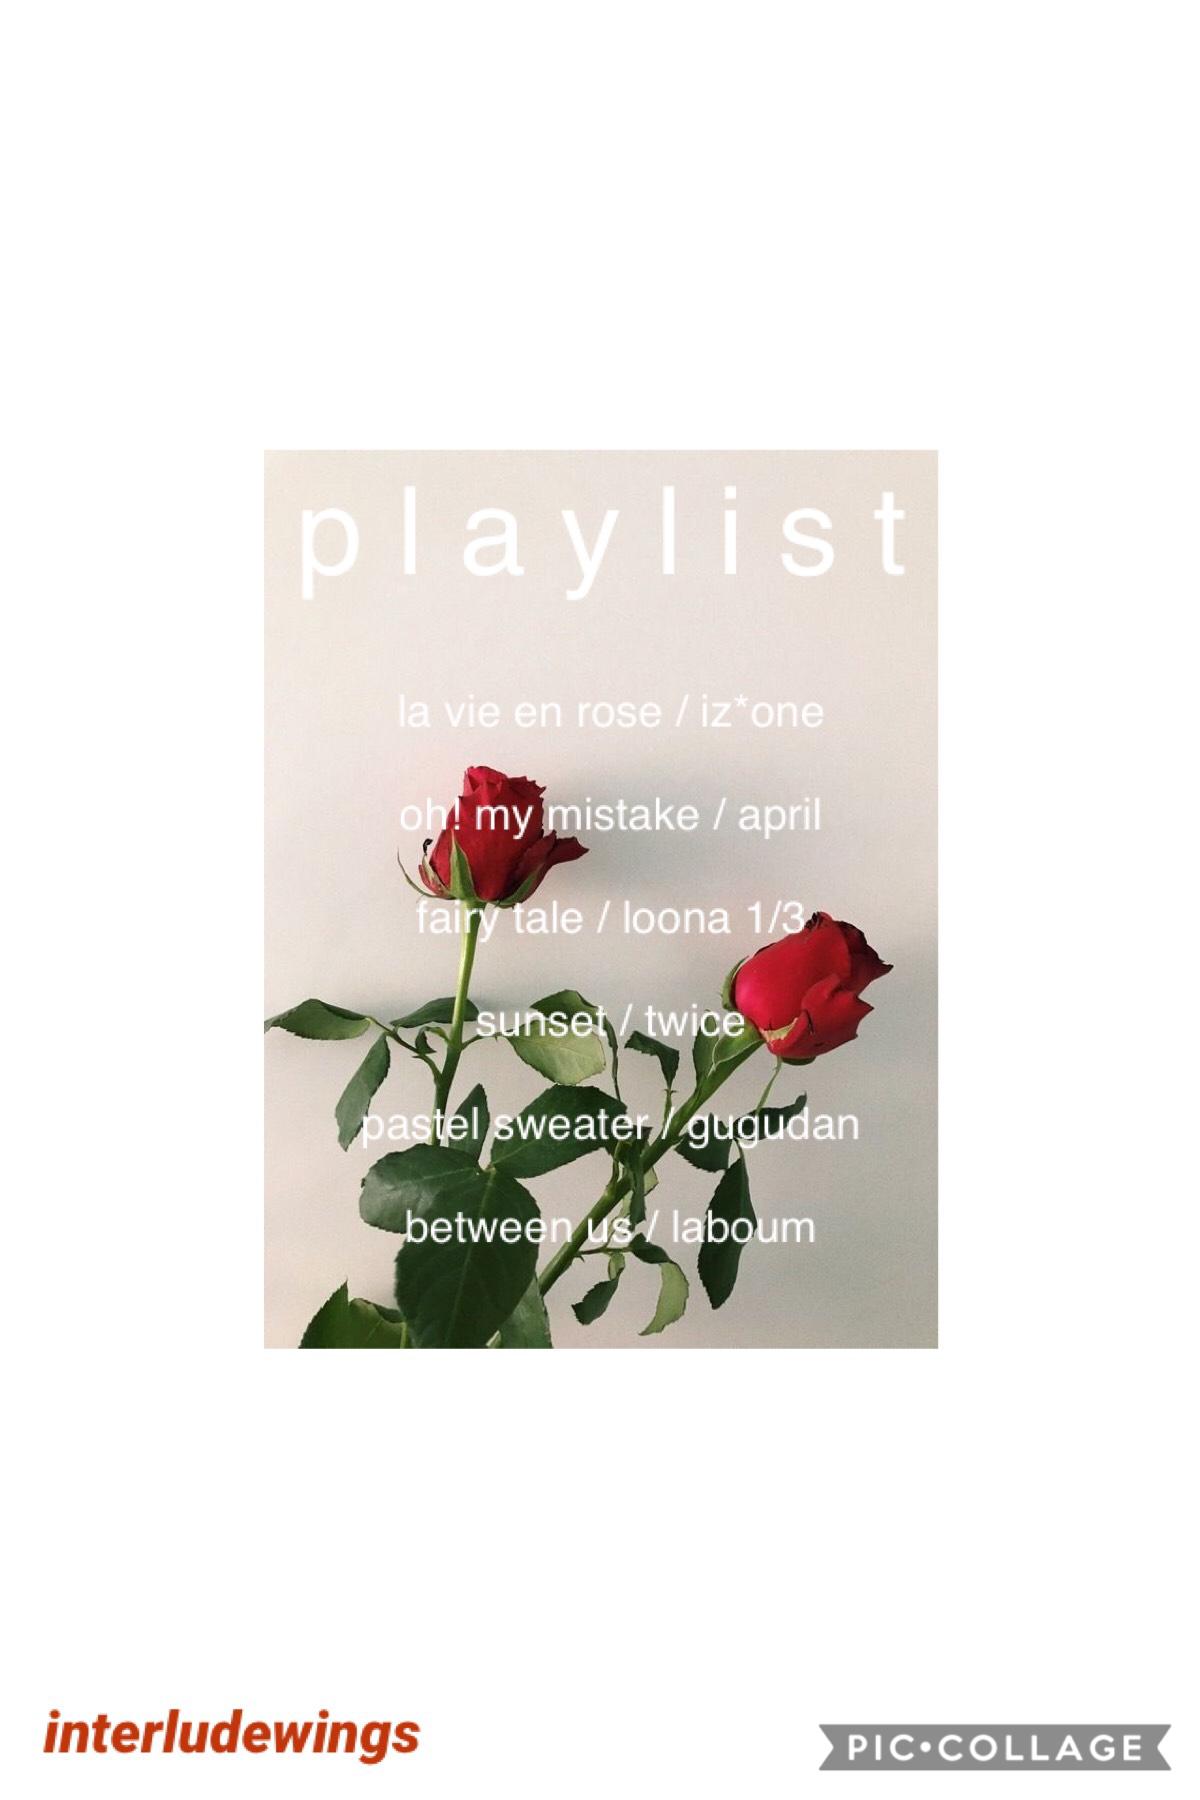 🌹 open 🌹
should i posts playlists here or on my second account?